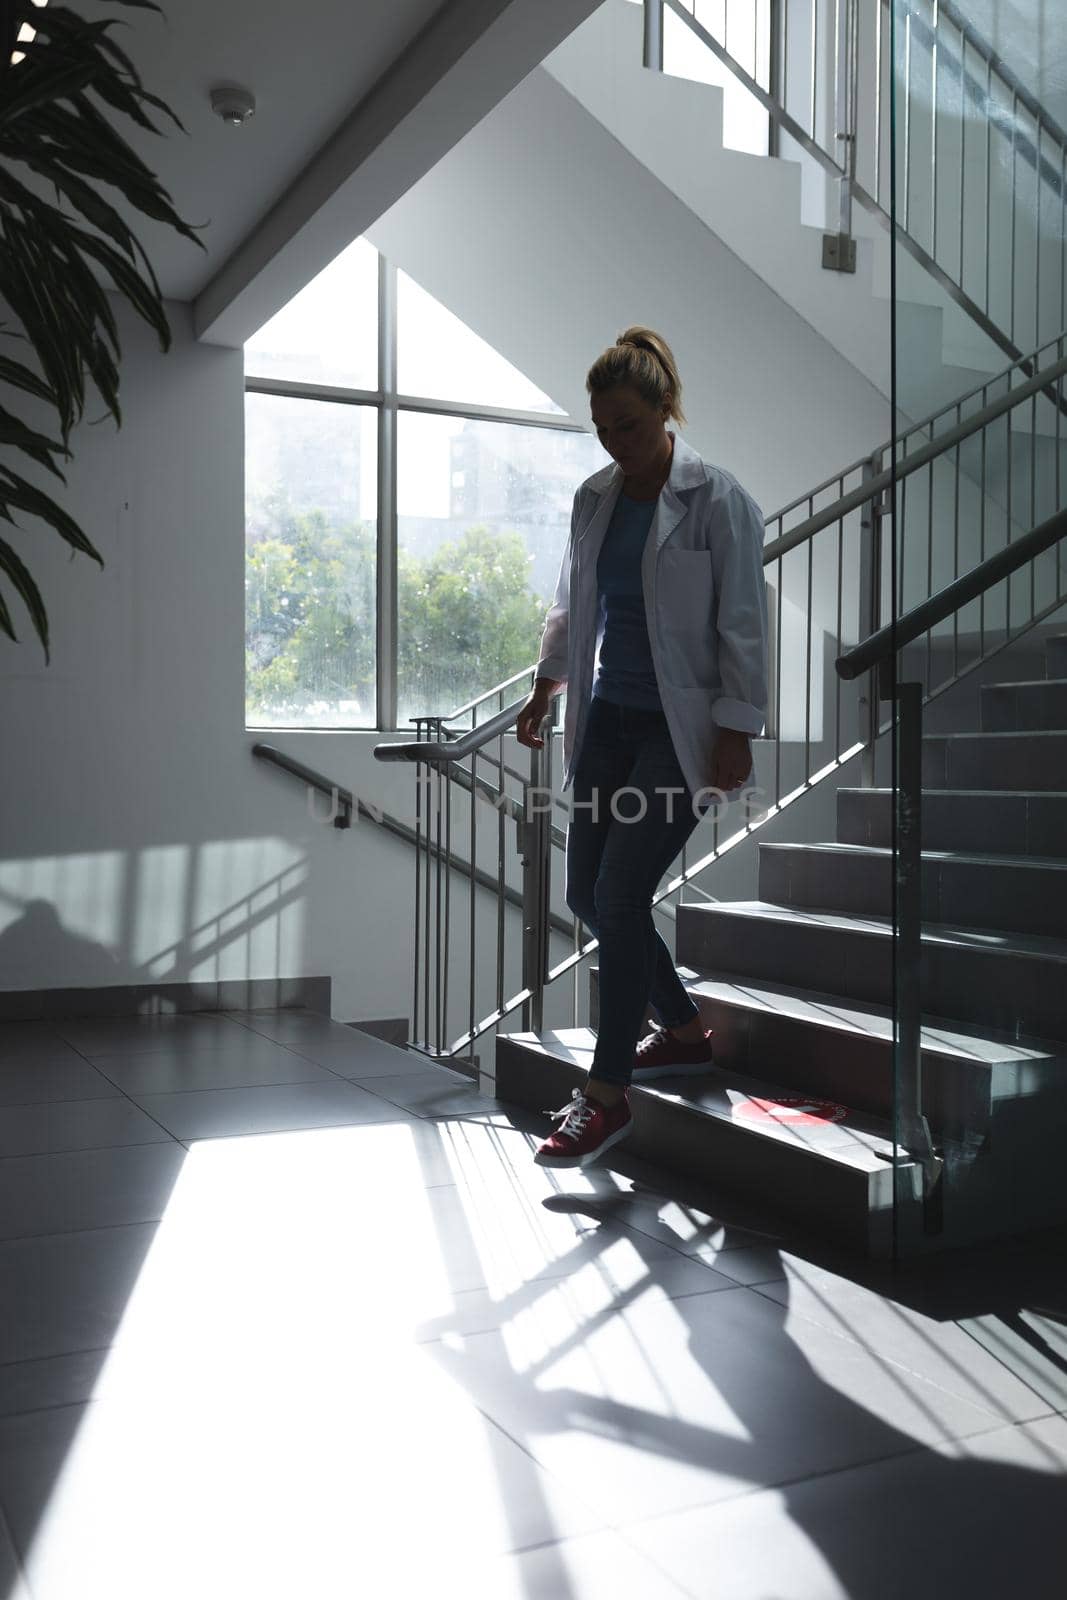 Caucasian female doctor going downstairs on hospital staircase during sunny day by Wavebreakmedia